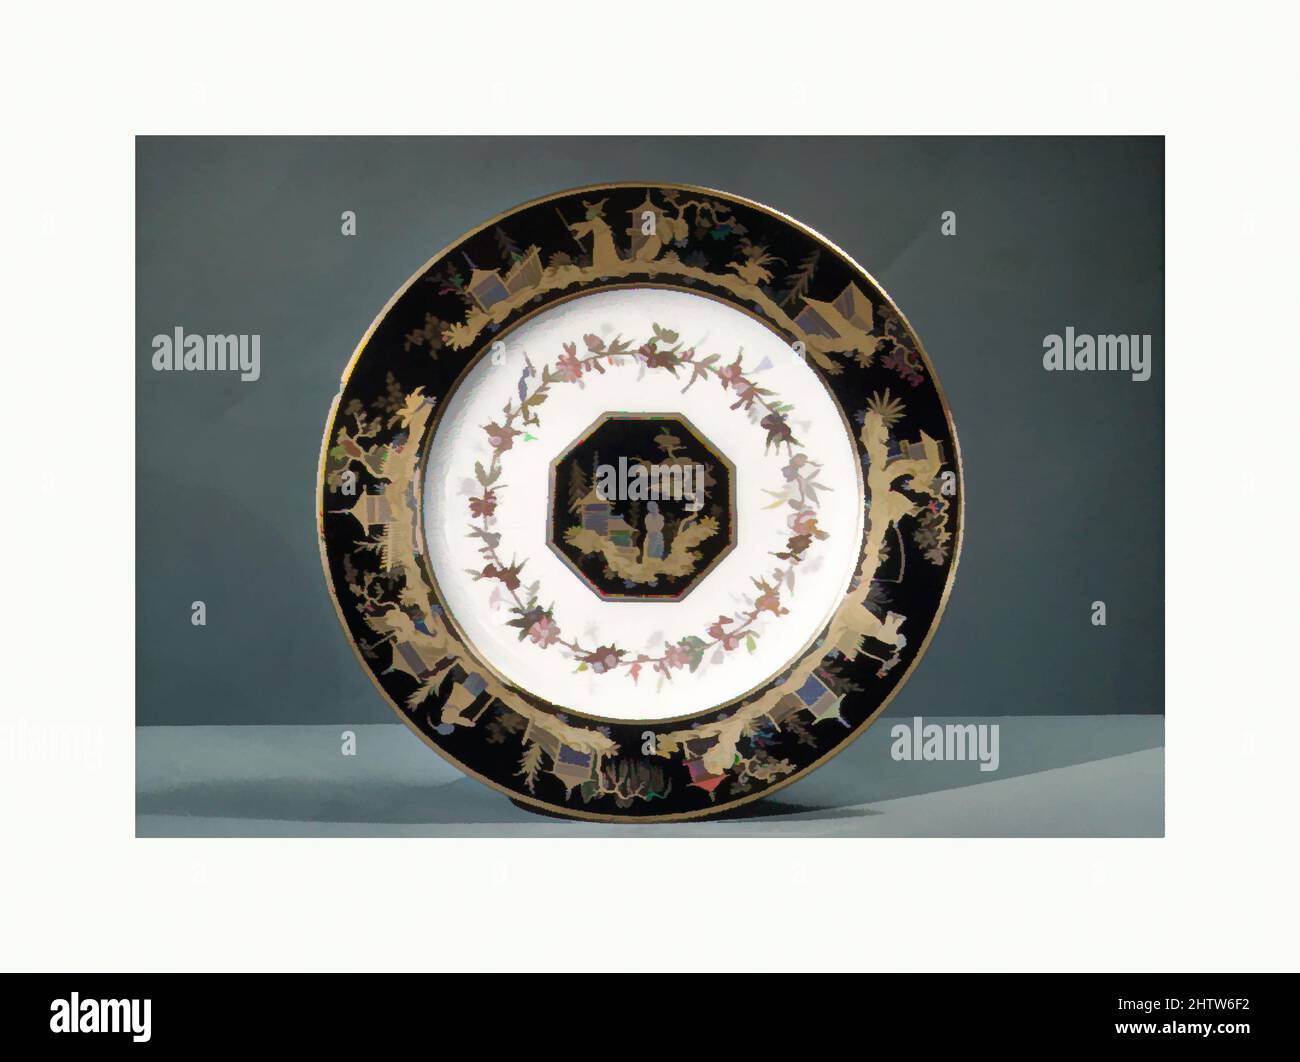 Art inspired by Plate, ca. 1791, French, Sèvres, Hard-paste porcelain, Diameter: 9 9/16 in. (24.3 cm), Ceramics-Porcelain, Porcelain decorated with a black ground in imitation of Asian lacquer was produced at Sèvres for about a fifteen-year period beginning in 1790. Furniture decorated, Classic works modernized by Artotop with a splash of modernity. Shapes, color and value, eye-catching visual impact on art. Emotions through freedom of artworks in a contemporary way. A timeless message pursuing a wildly creative new direction. Artists turning to the digital medium and creating the Artotop NFT Stock Photo